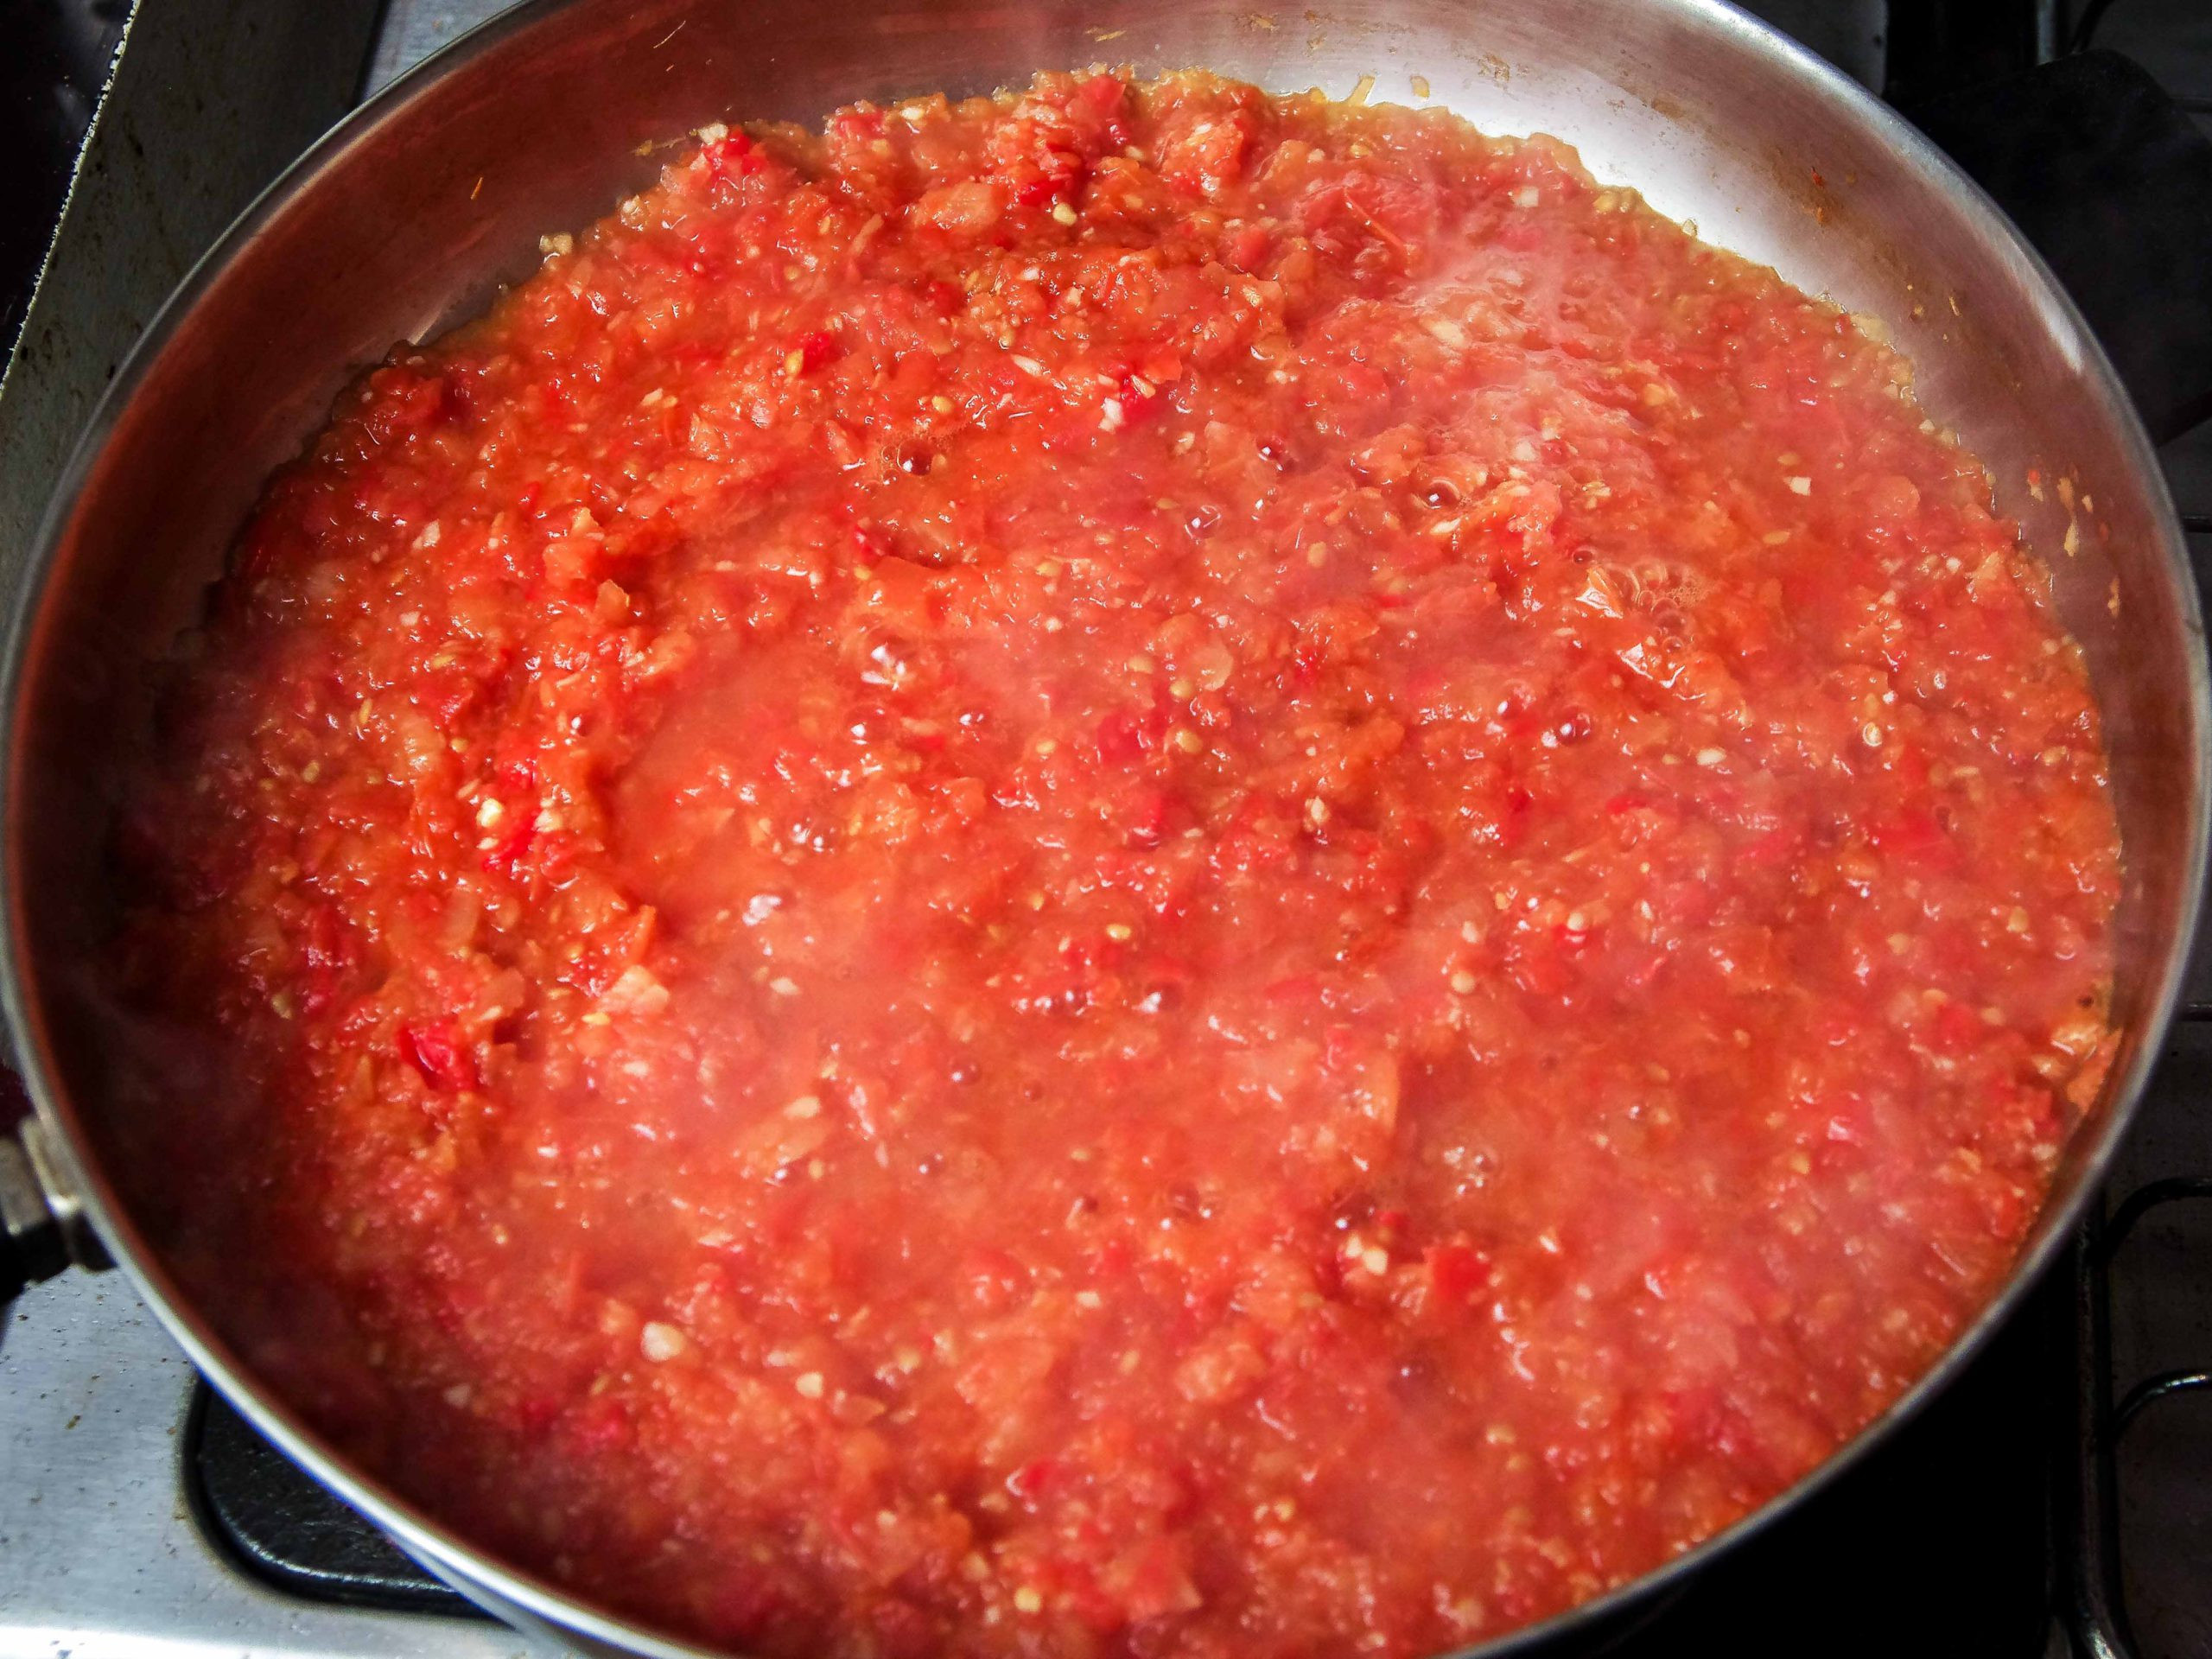 Red tomato sauce reducing in a steel pan.